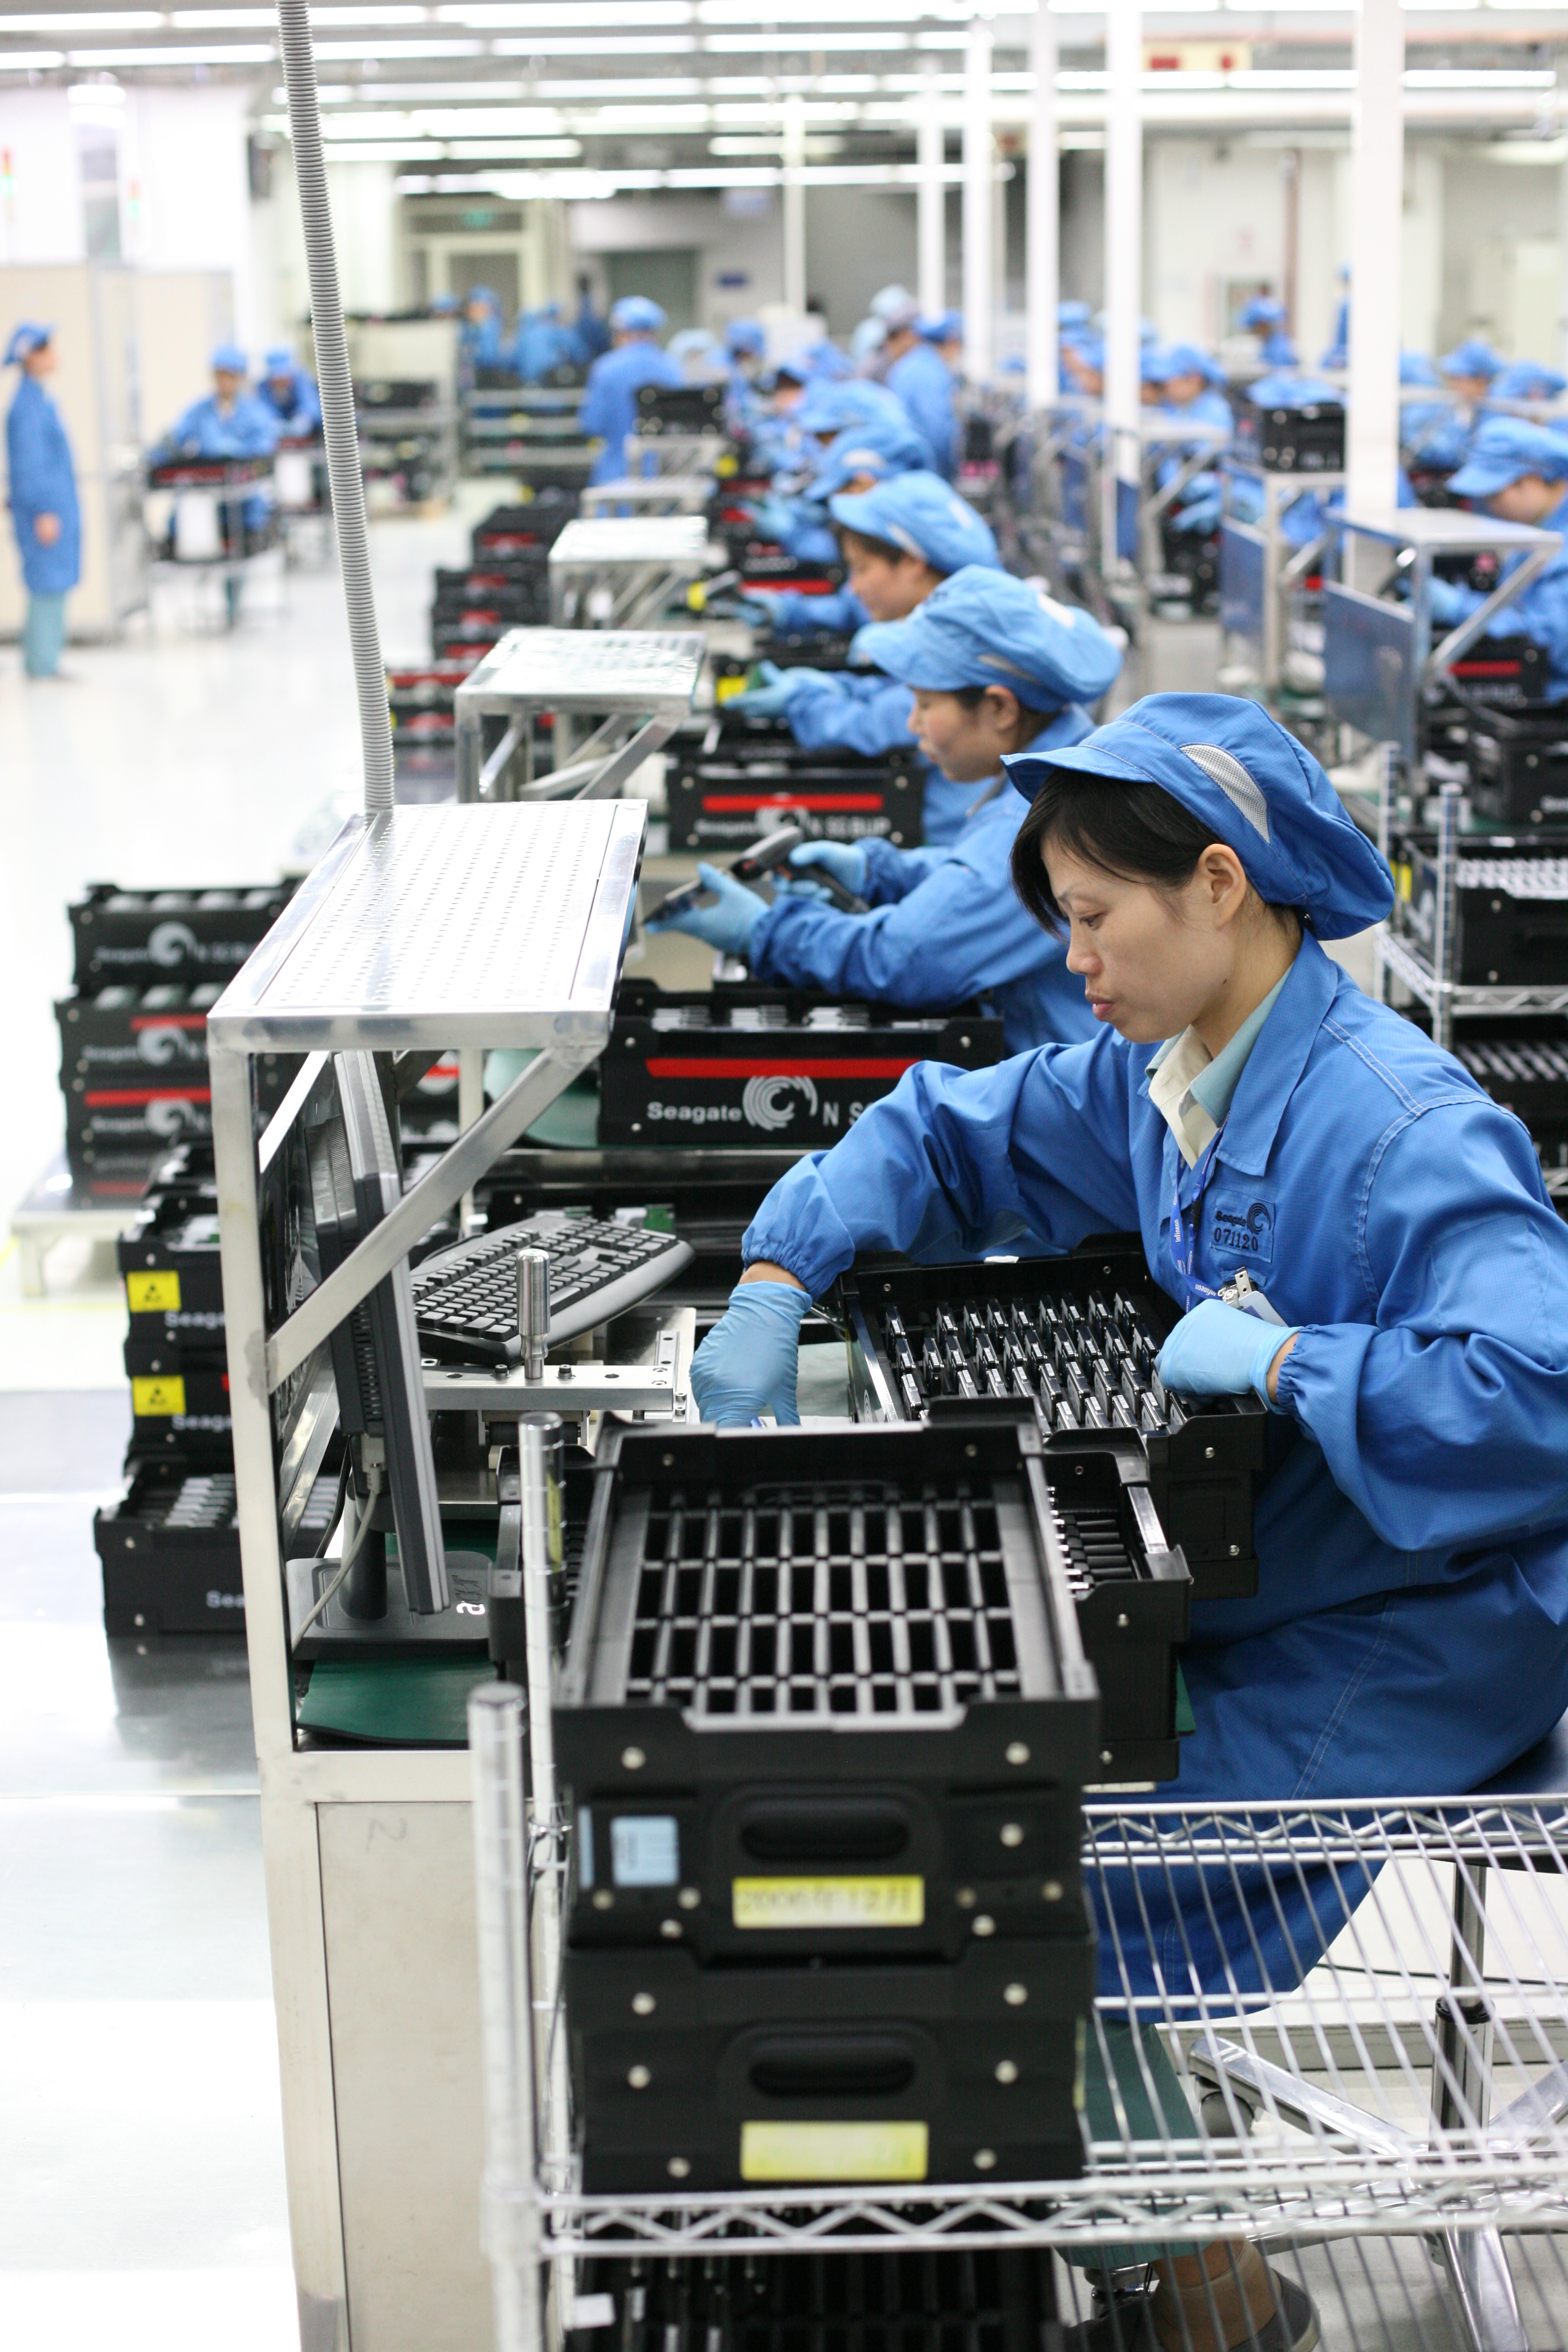 “Made in China 2015”: China to strengthen its manufacturing capabilities